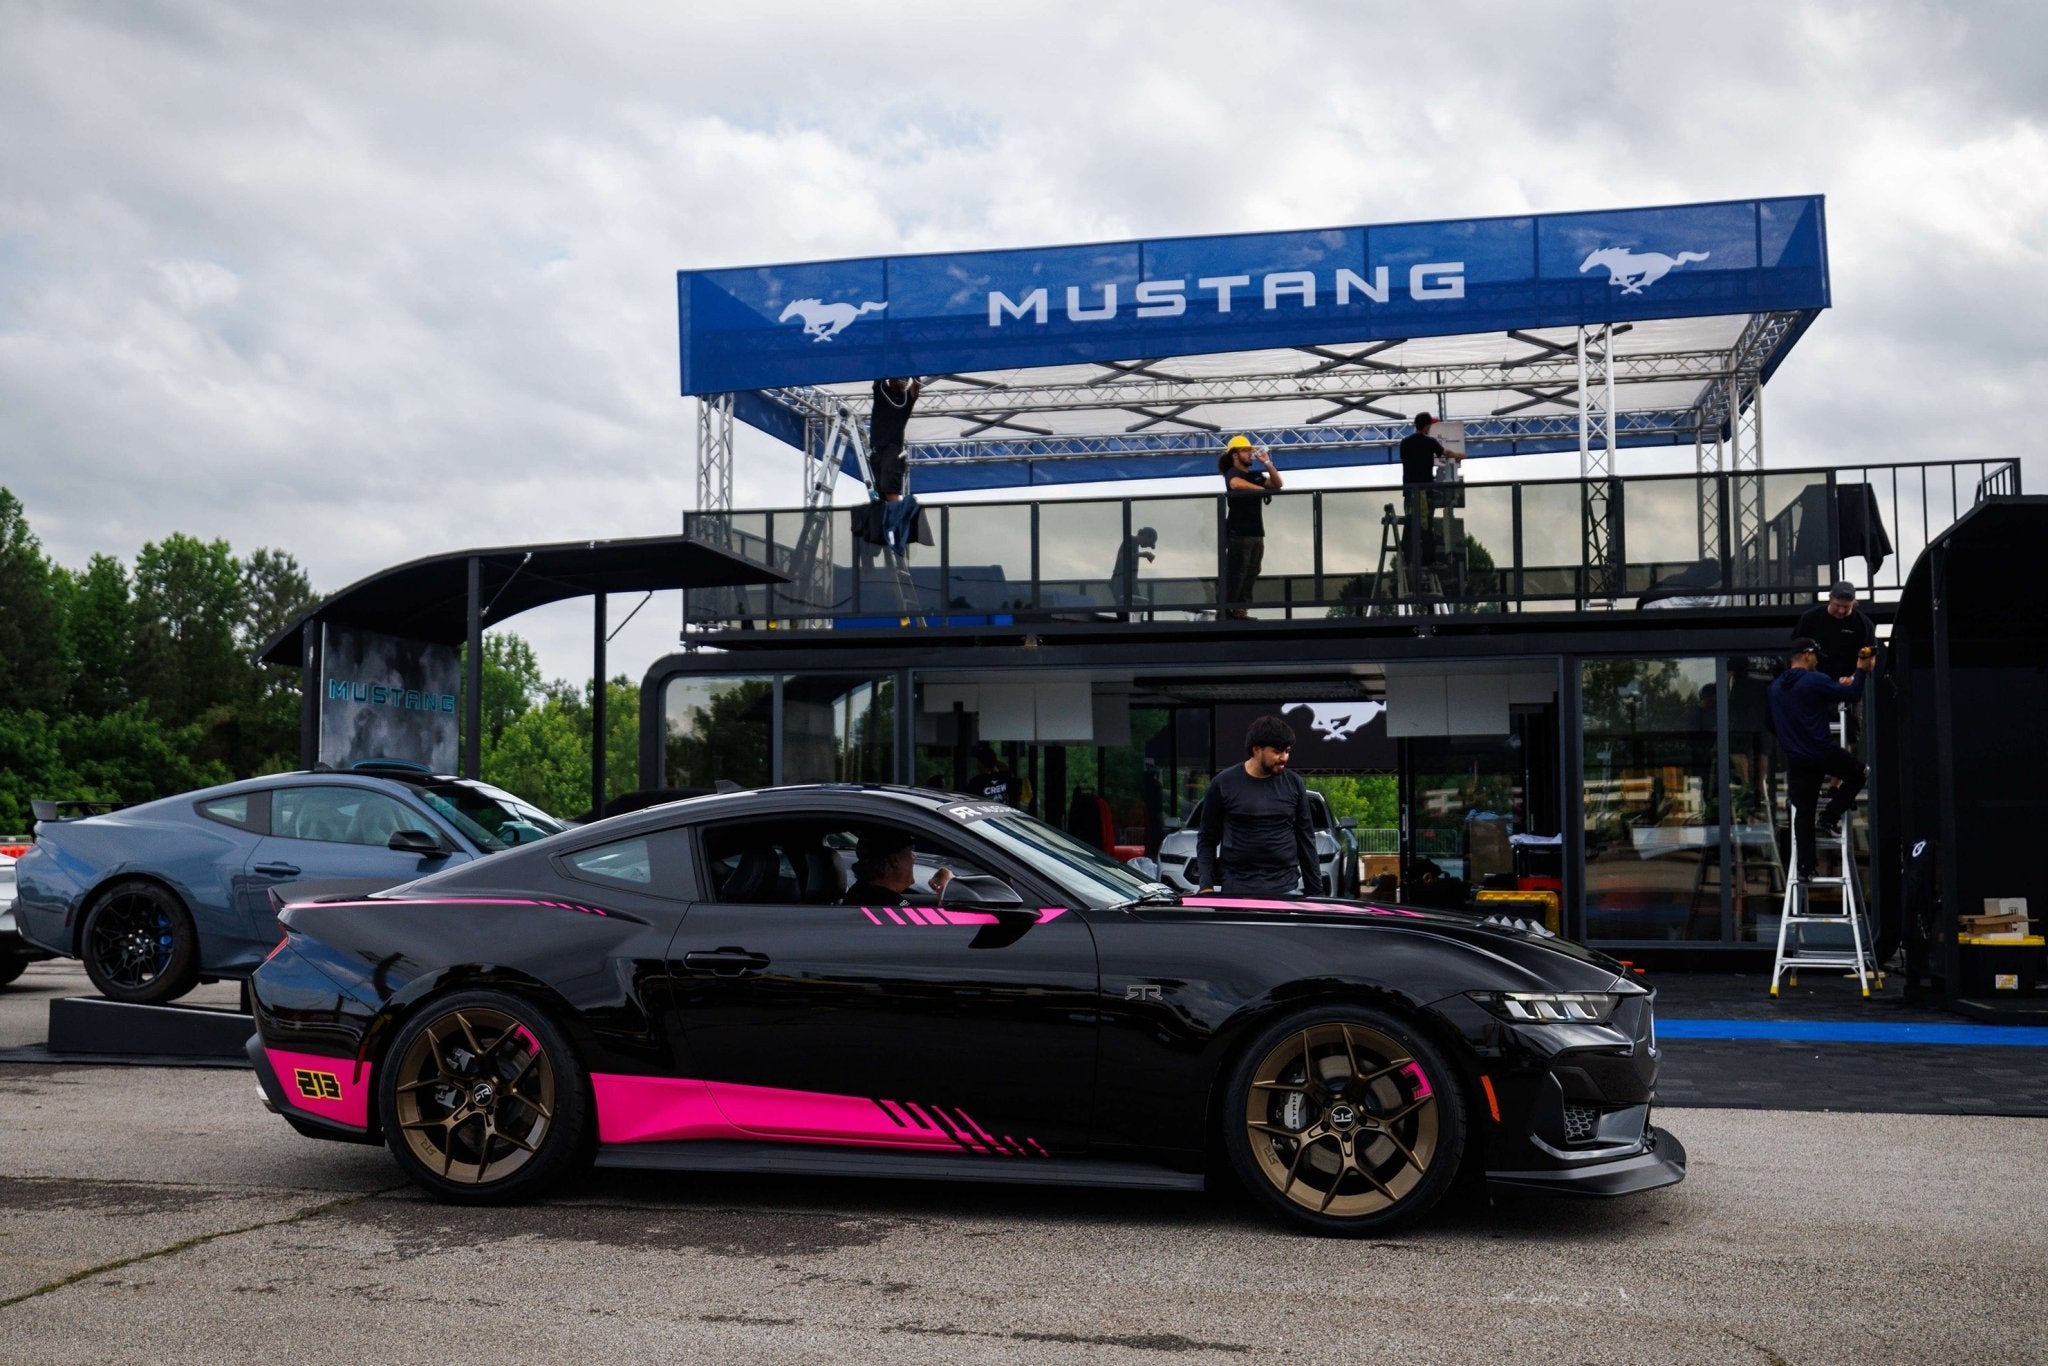 Ben Hobson Edition Mustang RTR Spec 2 in front of Mustang Unleashed display